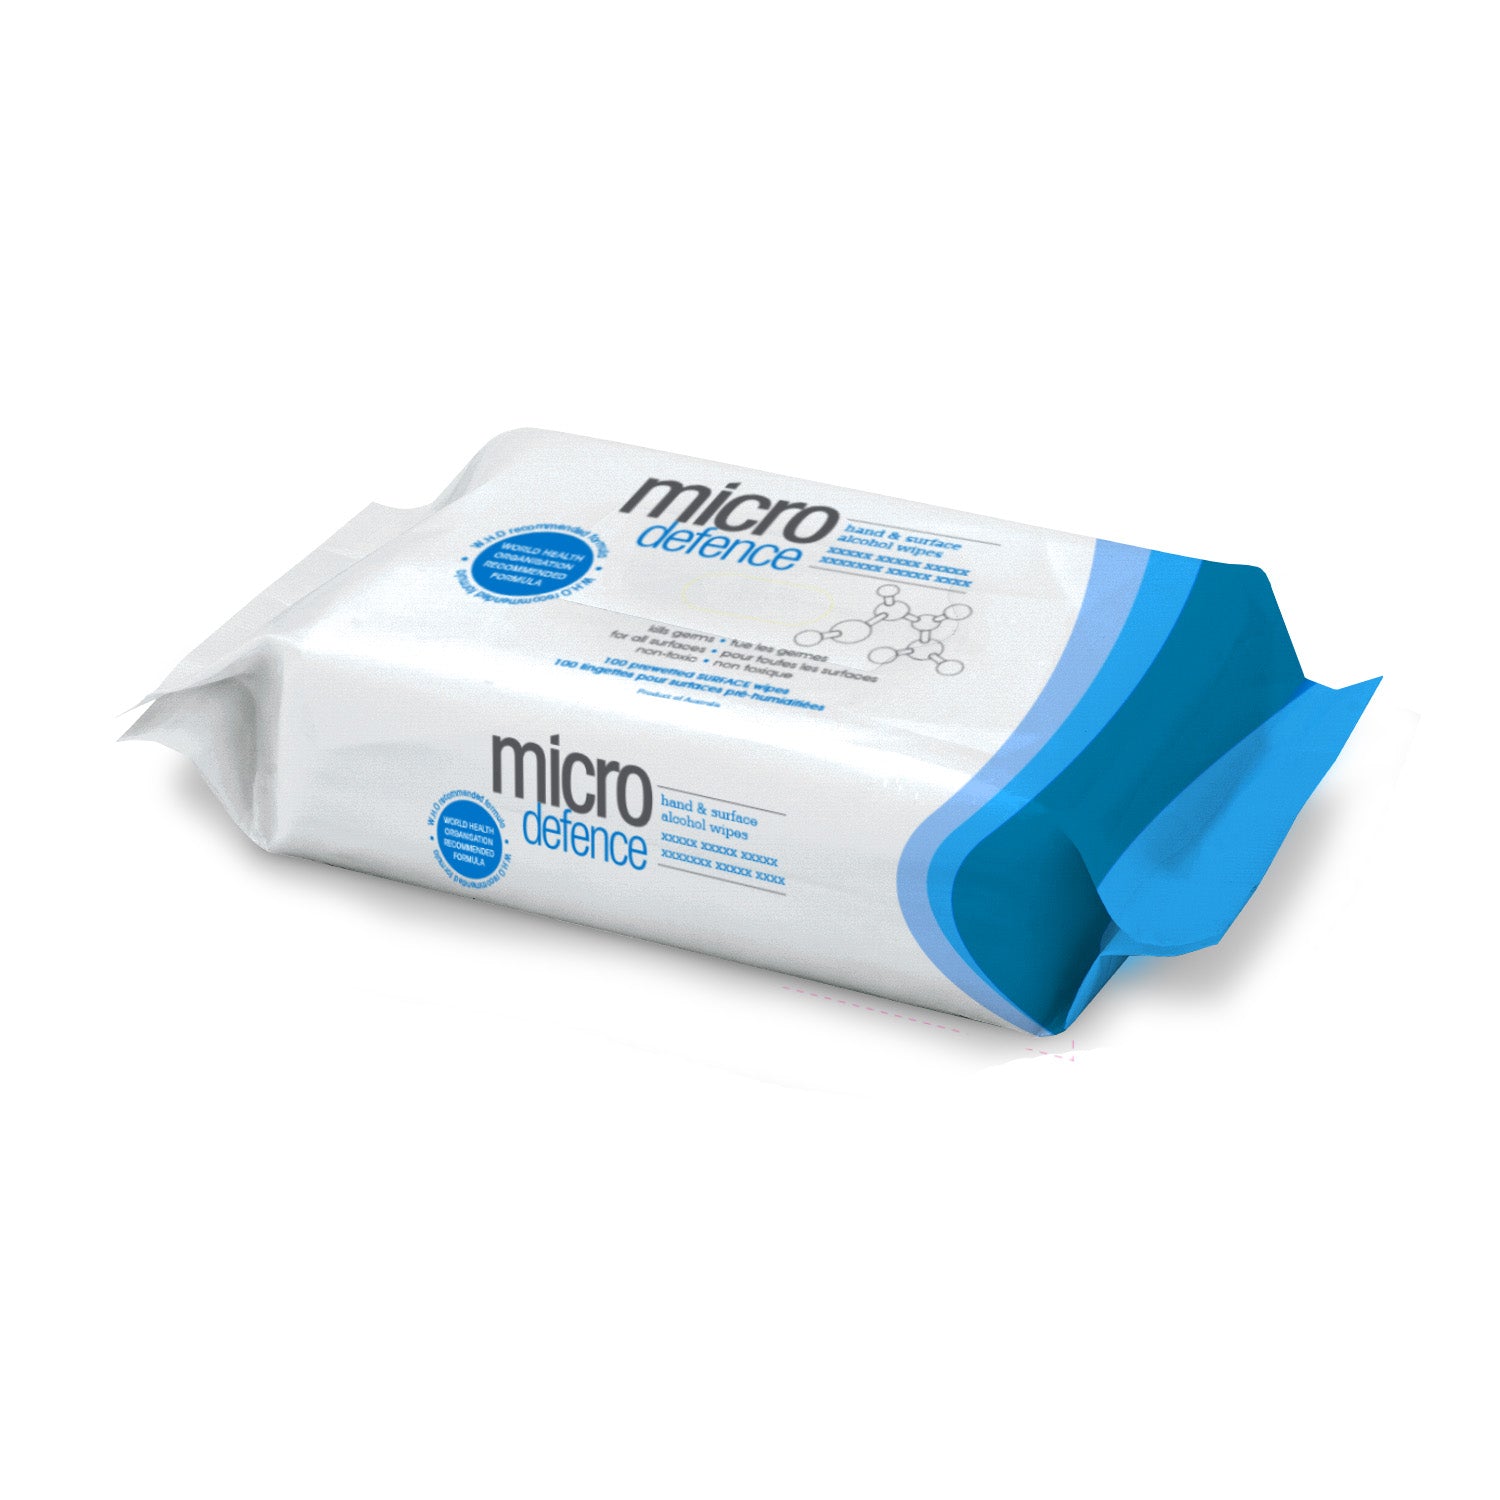 Micro Defence Hand & Surface Alcohol Wipes 100 pack